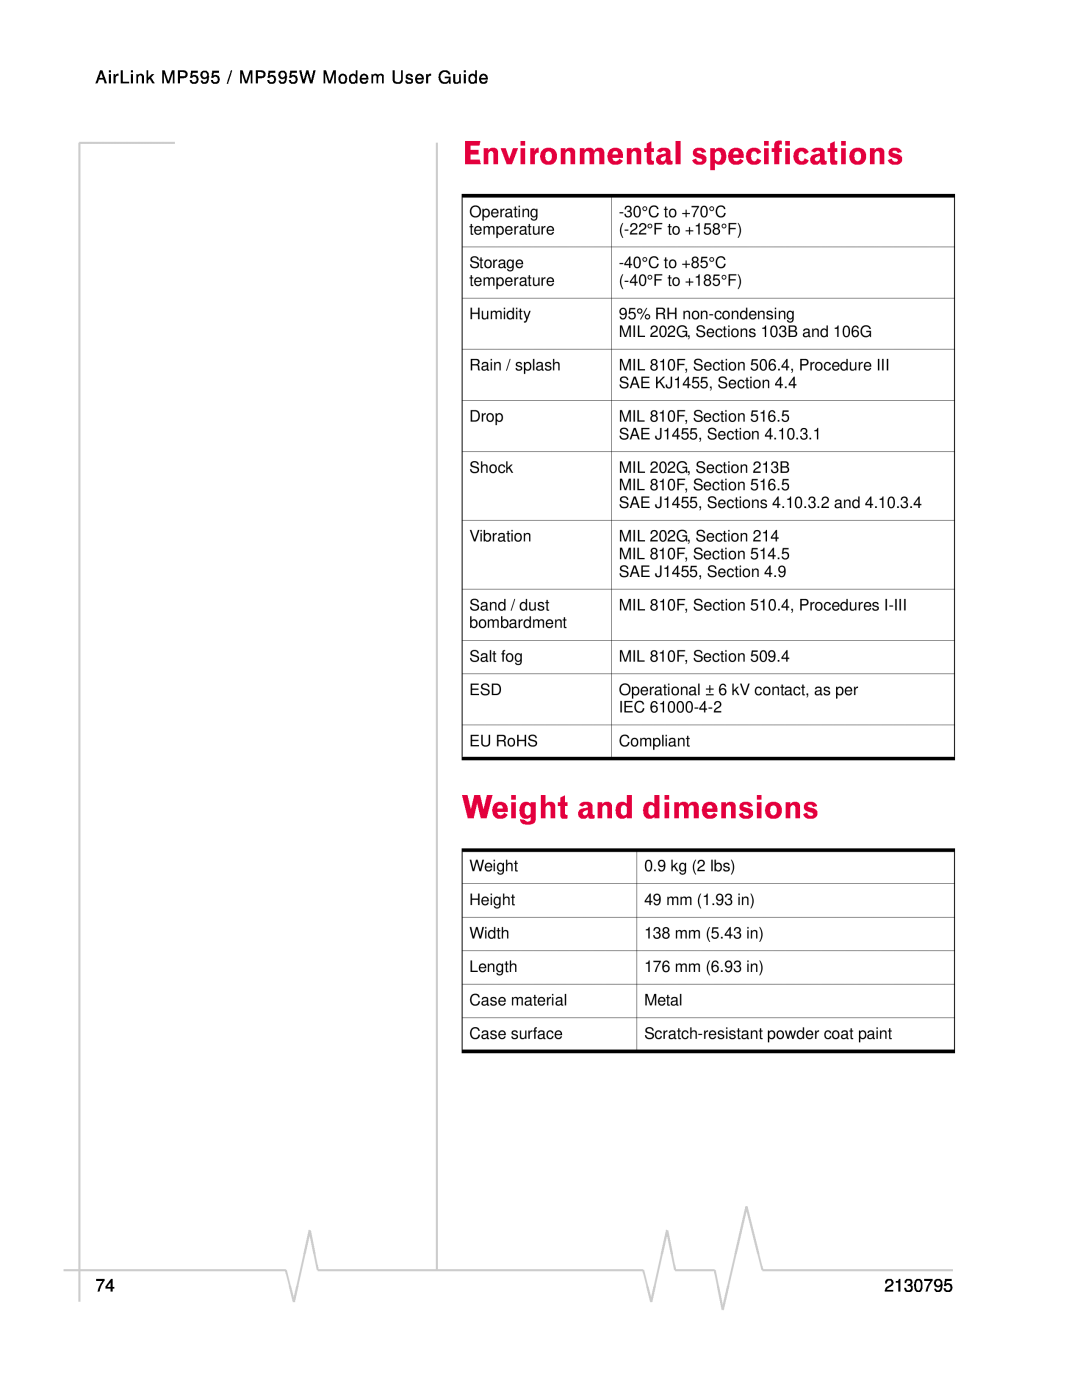 Sierra Wireless Environmental specifications, Weight and dimensions, AirLink MP595 / MP595W Modem User Guide, 2130795 